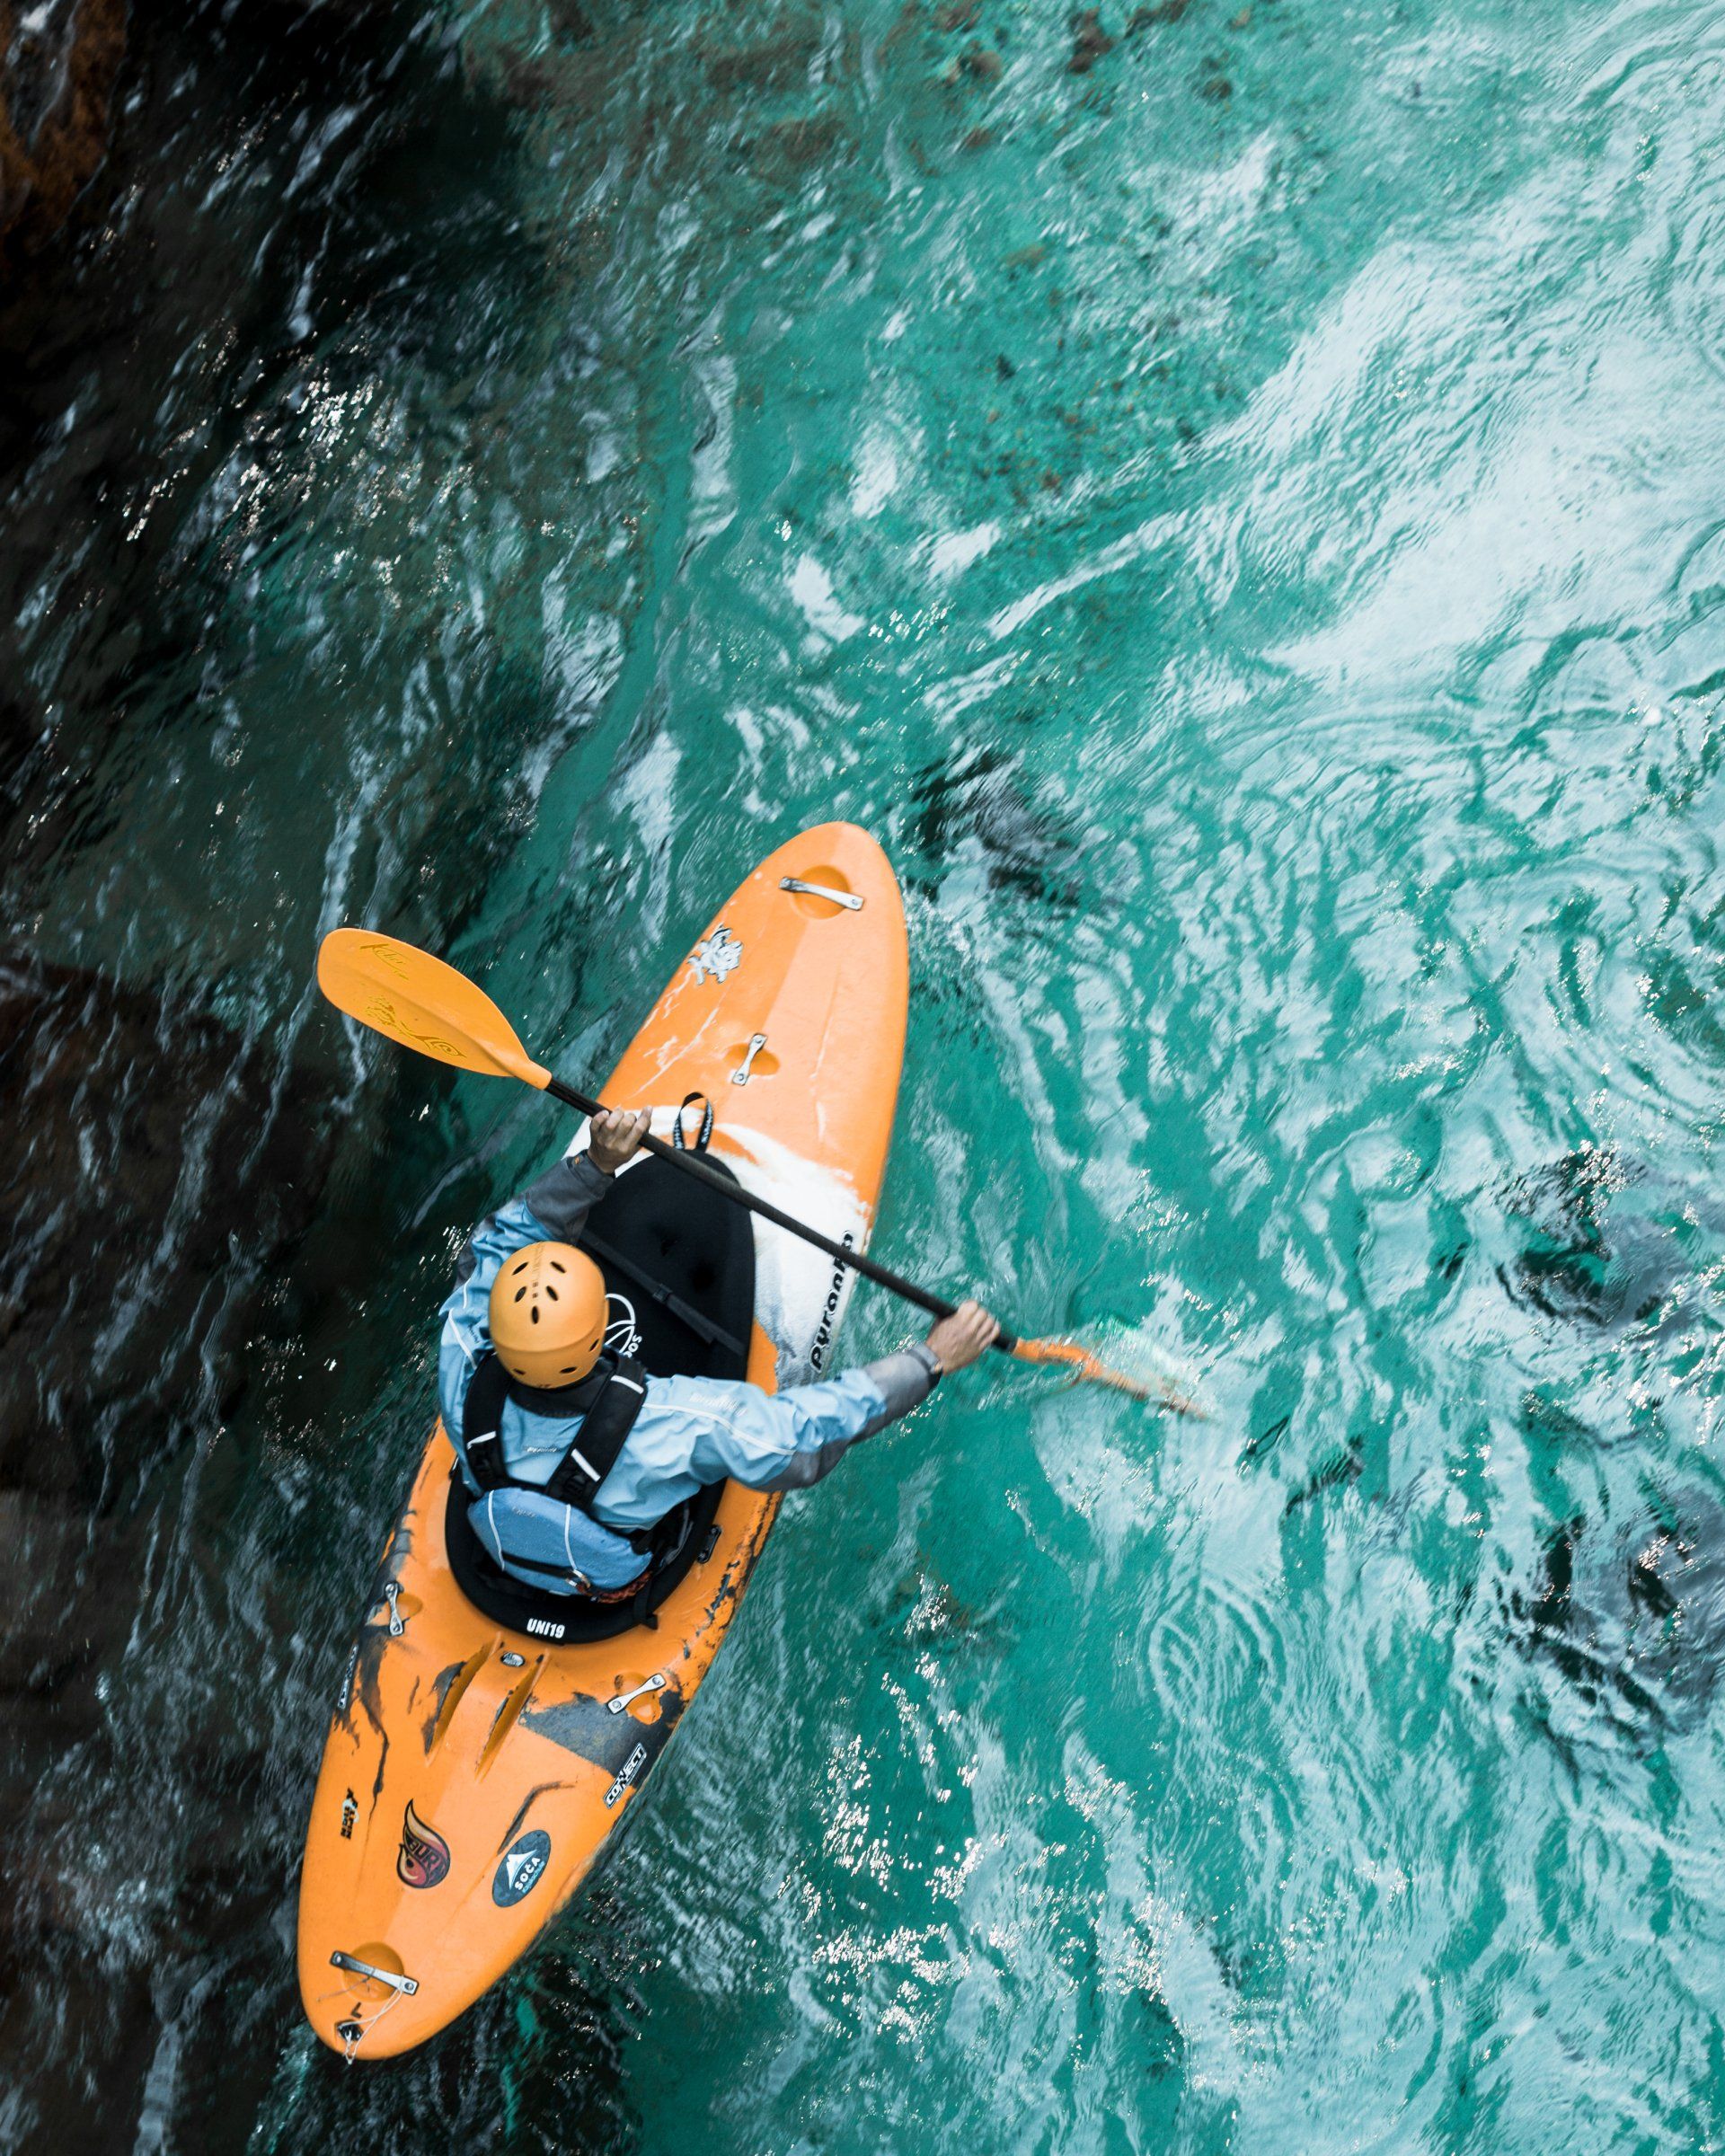 A person in an orange kayak is paddling down a river.